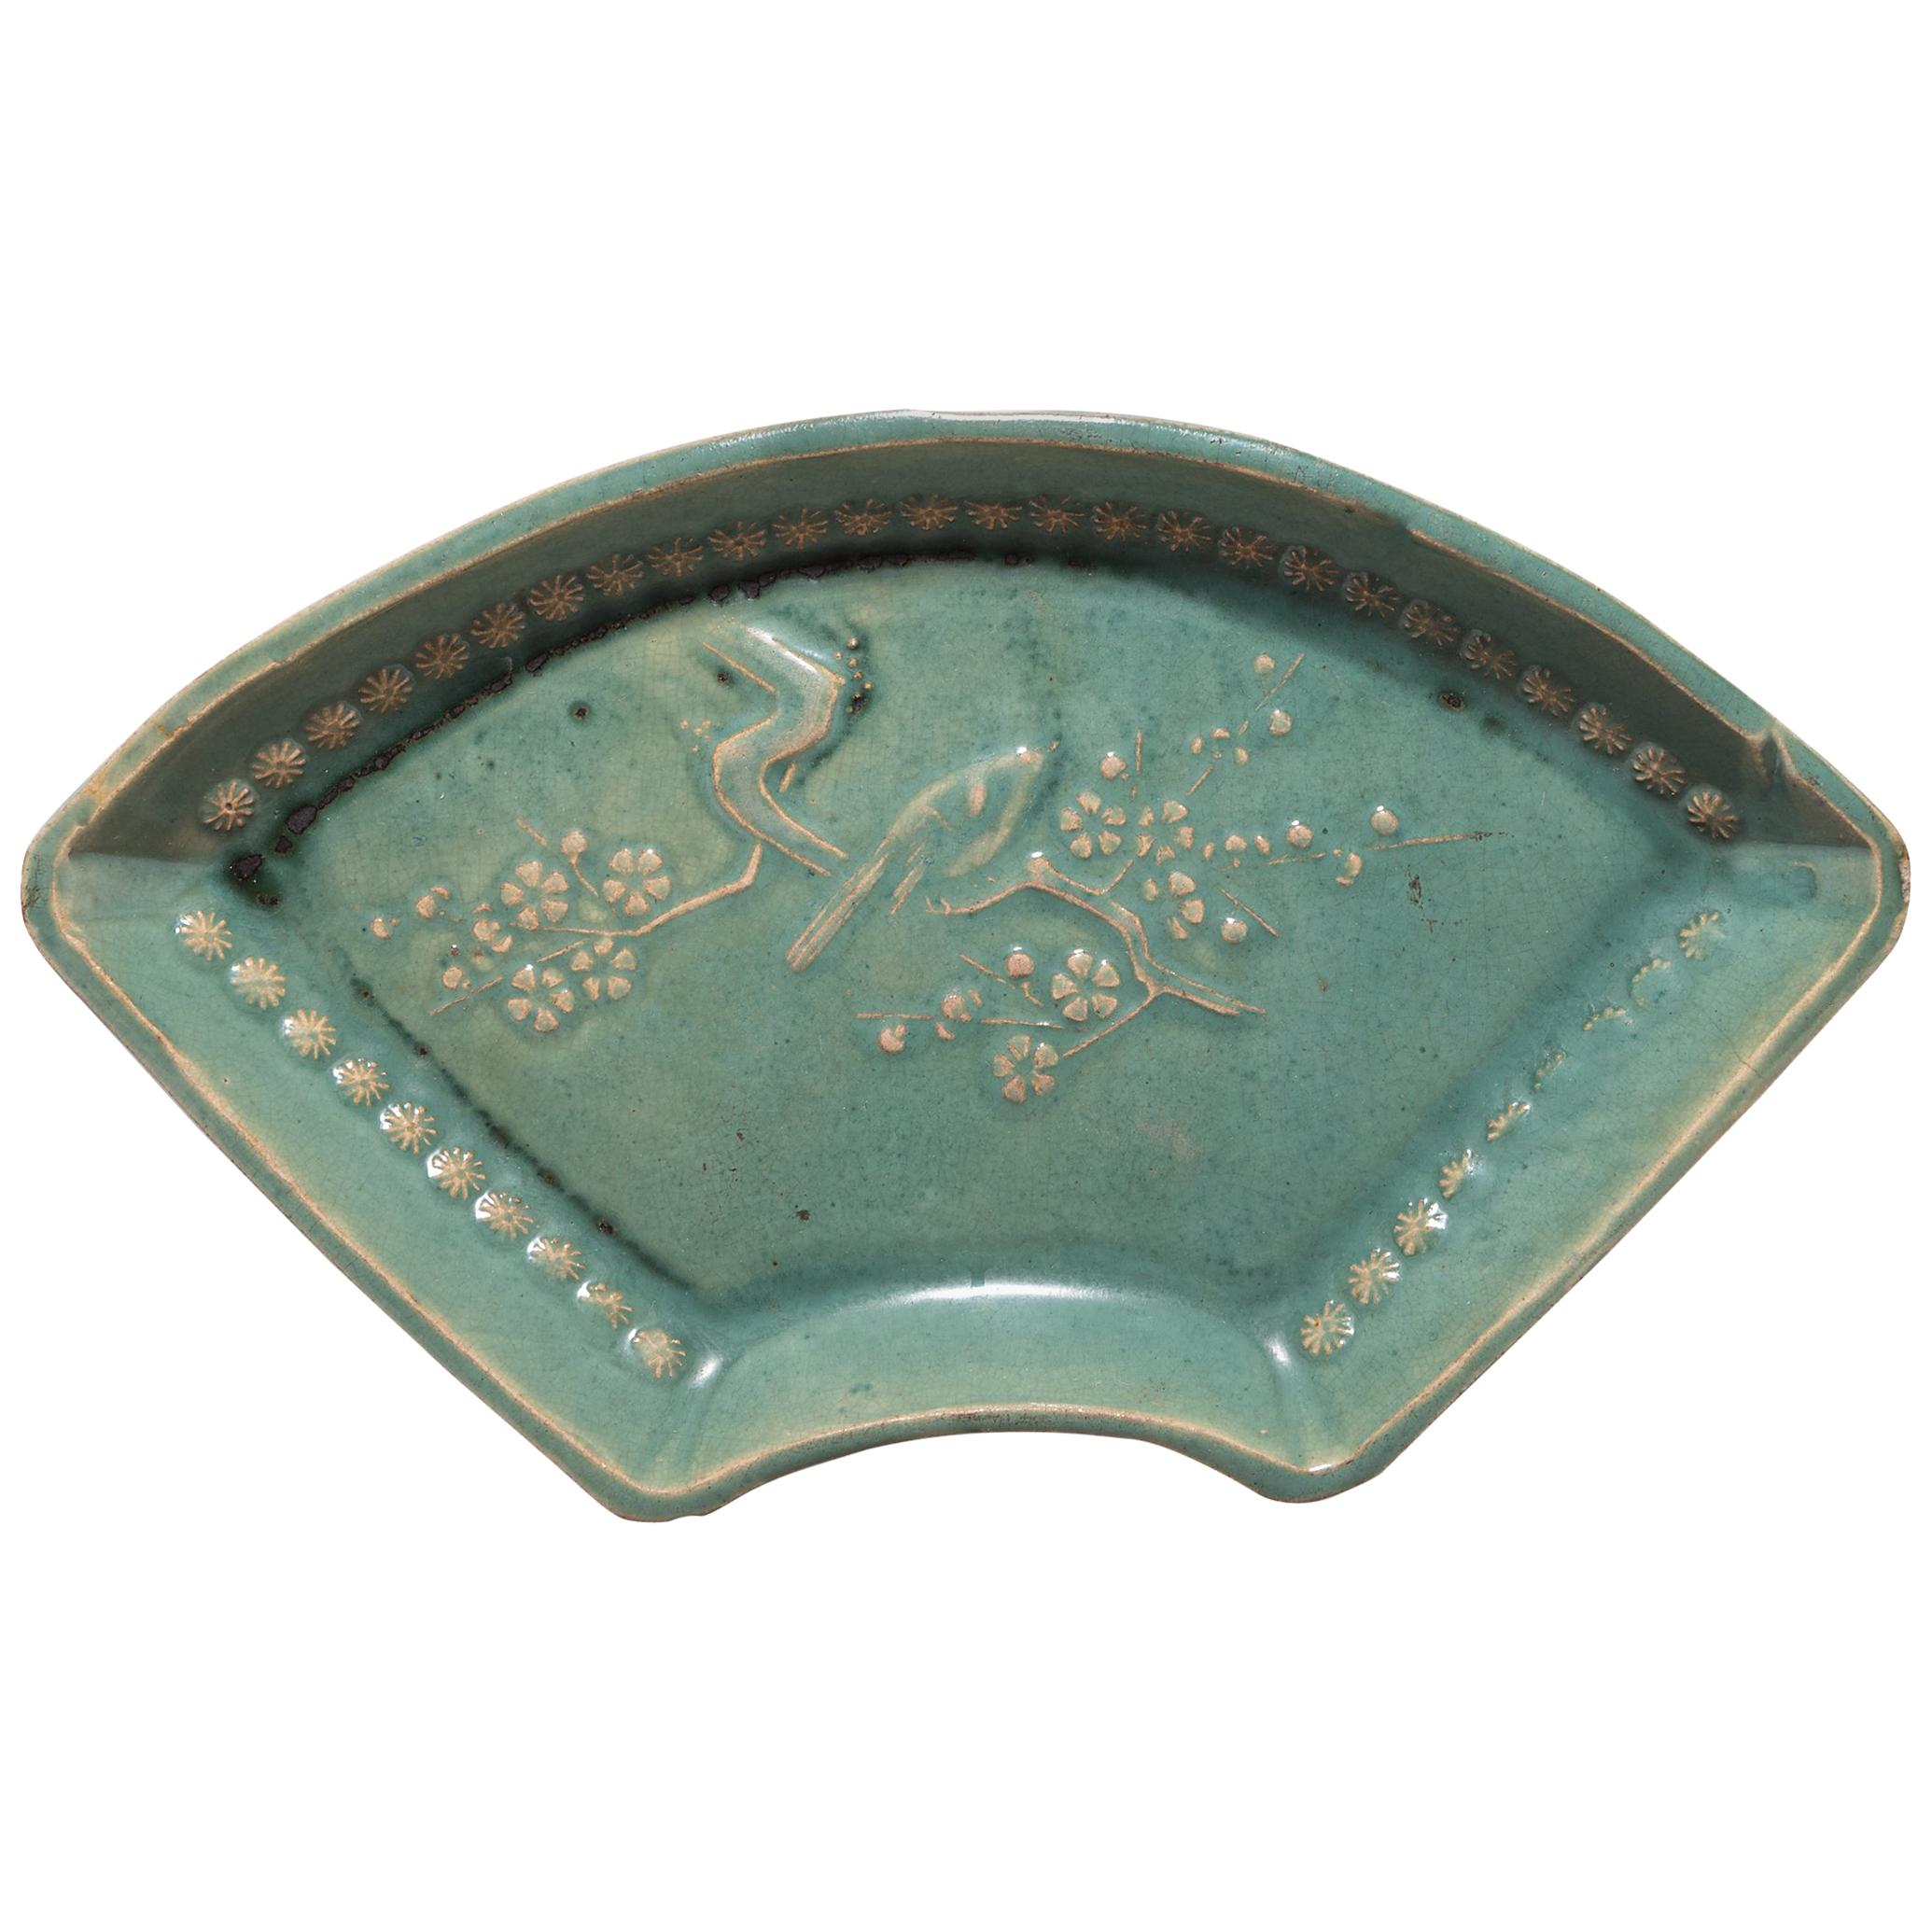 Early 20th Century Chinese Celadon Fan Form Dish